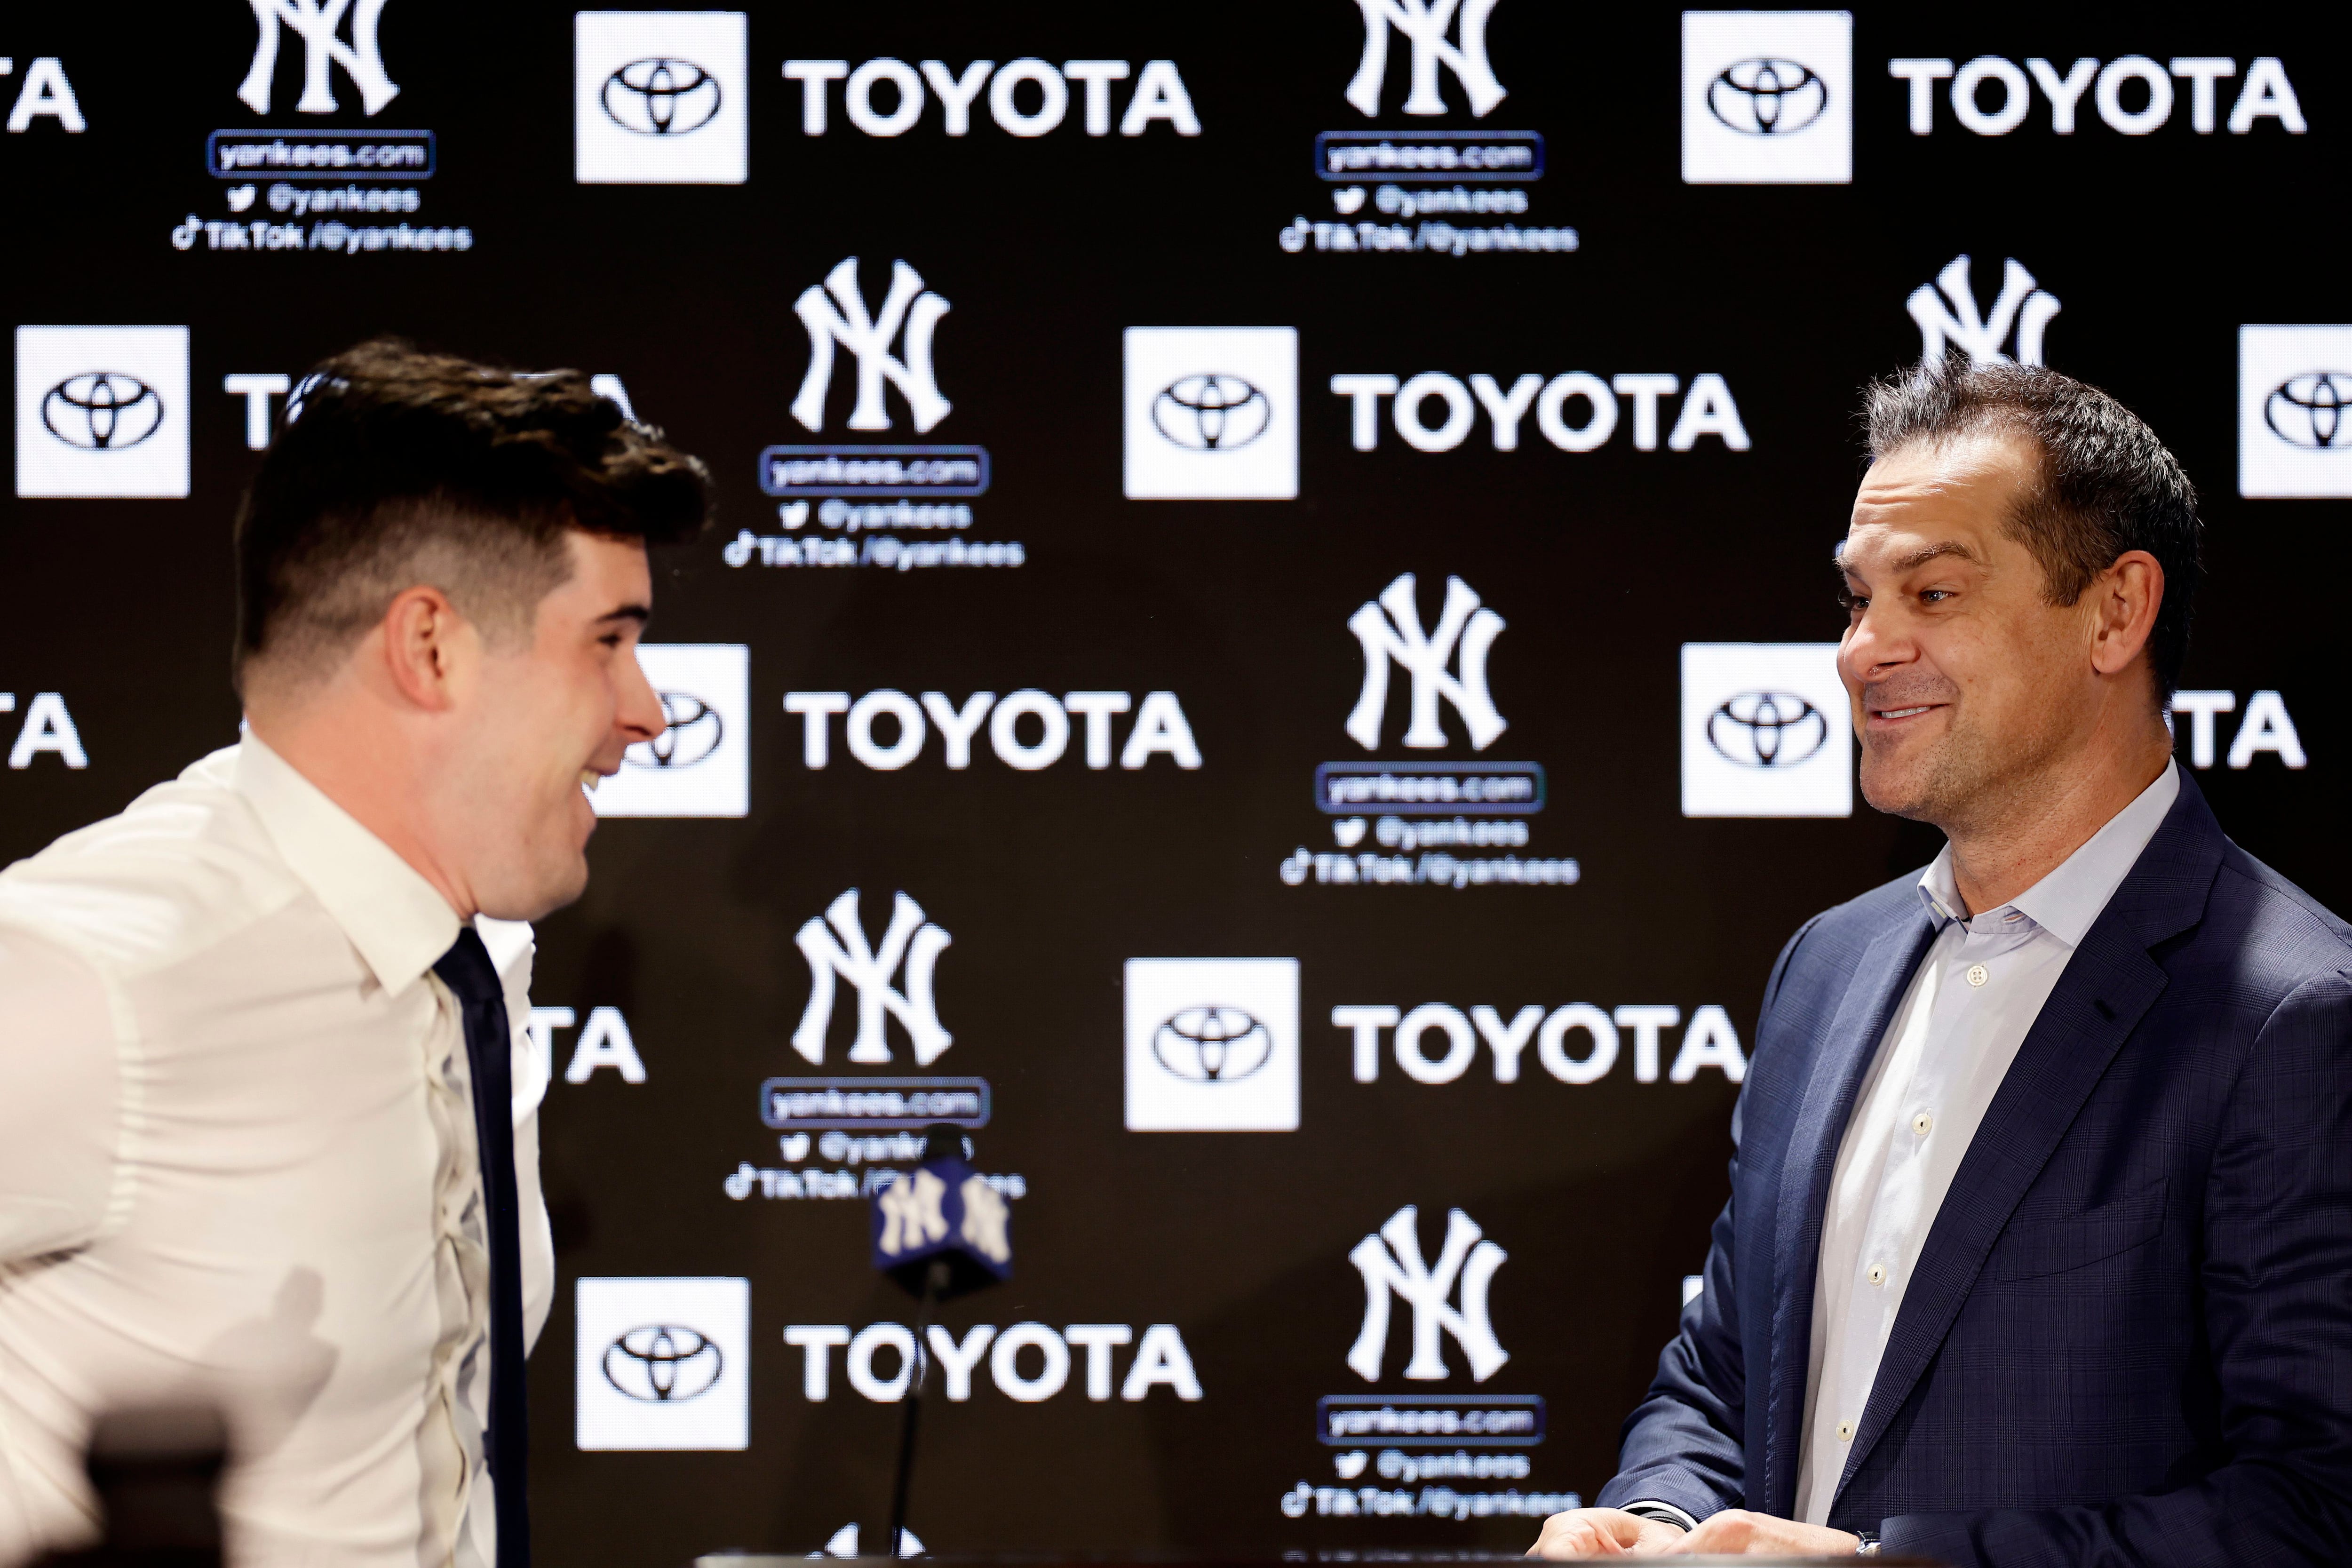 Carlos Rodón, with new look, puts on Yankee pinstripes – Trentonian